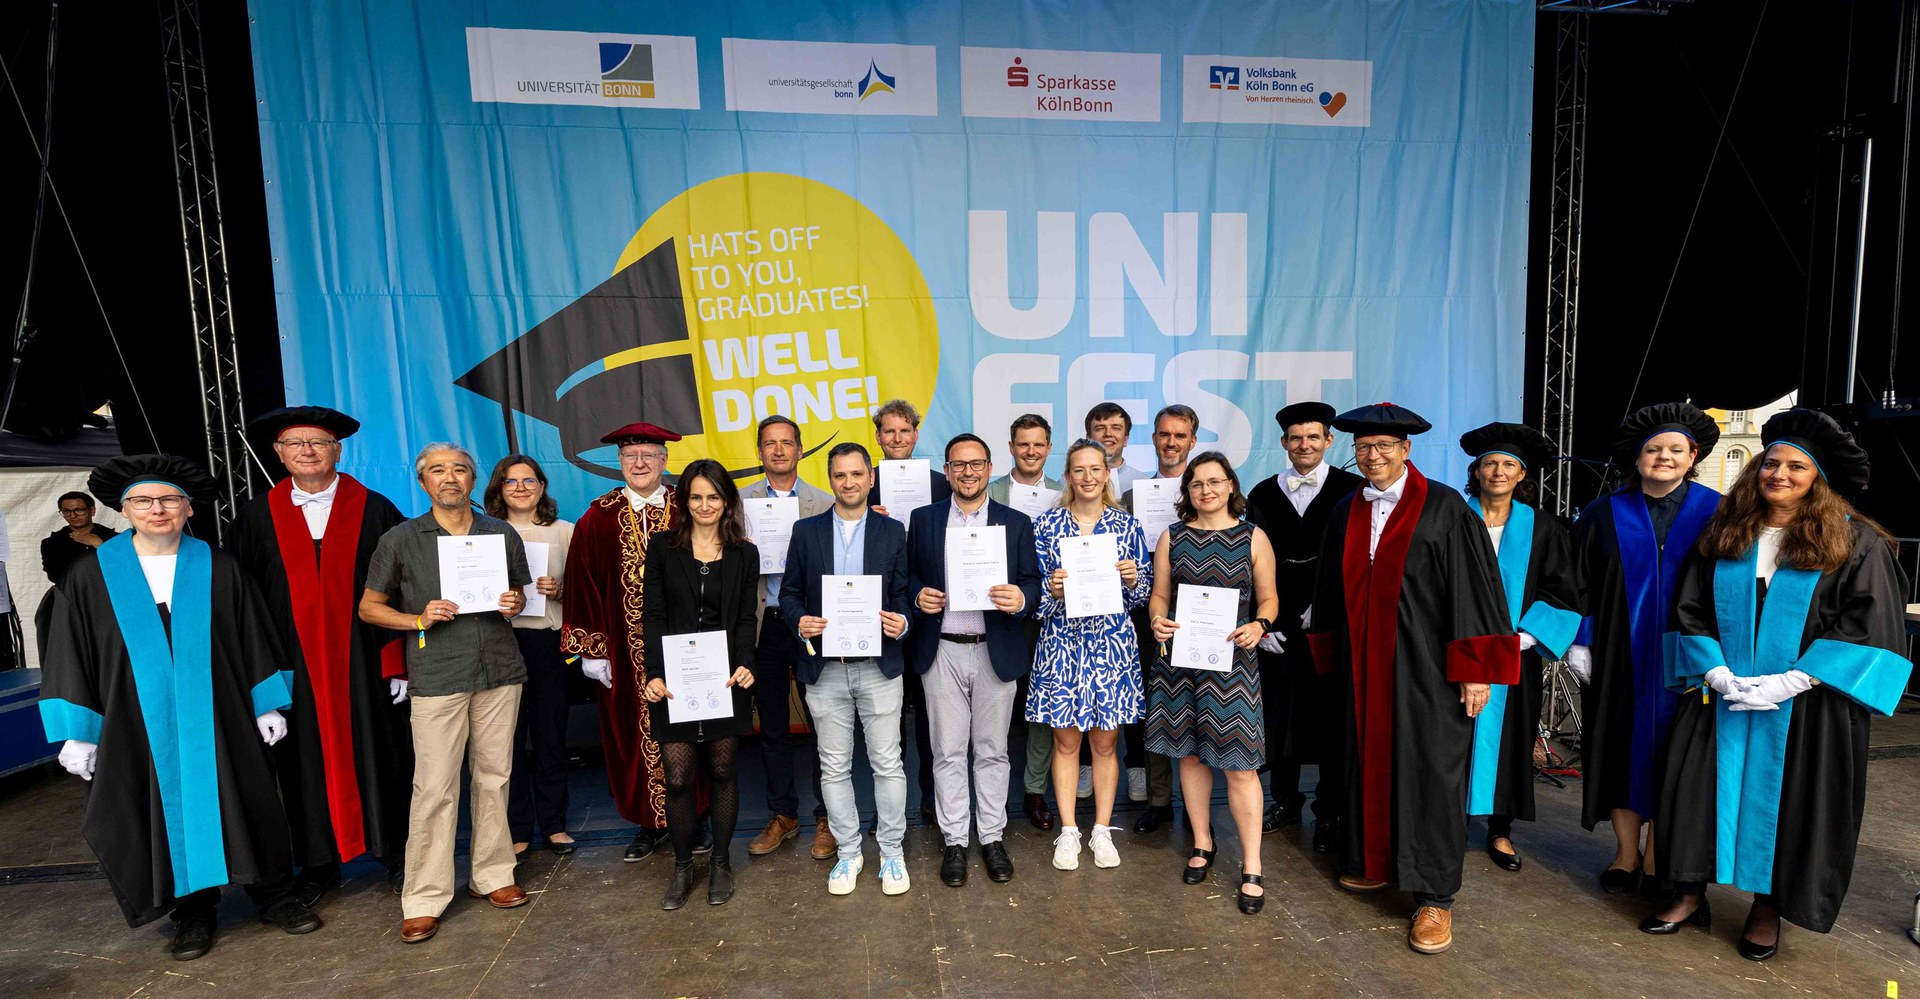 During a ceremony forming part of this year’s Universitätsfest, fourteen teachers have been presented with teaching prizes from the University in recognition of their dedication to the profession.